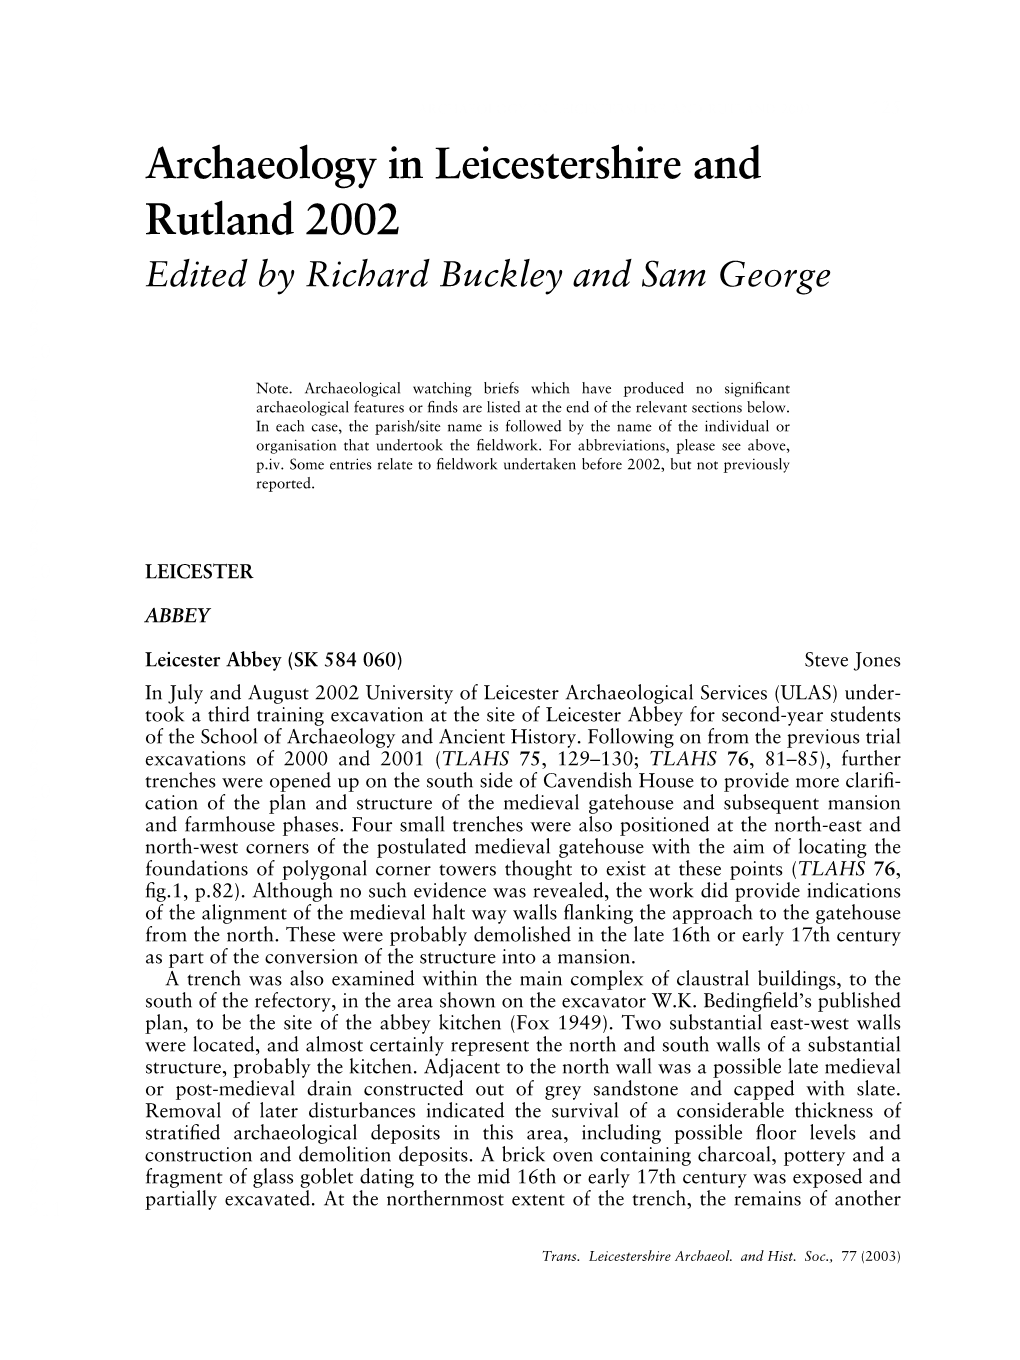 Archaeology in Leicestershire and Rutland 2002 125